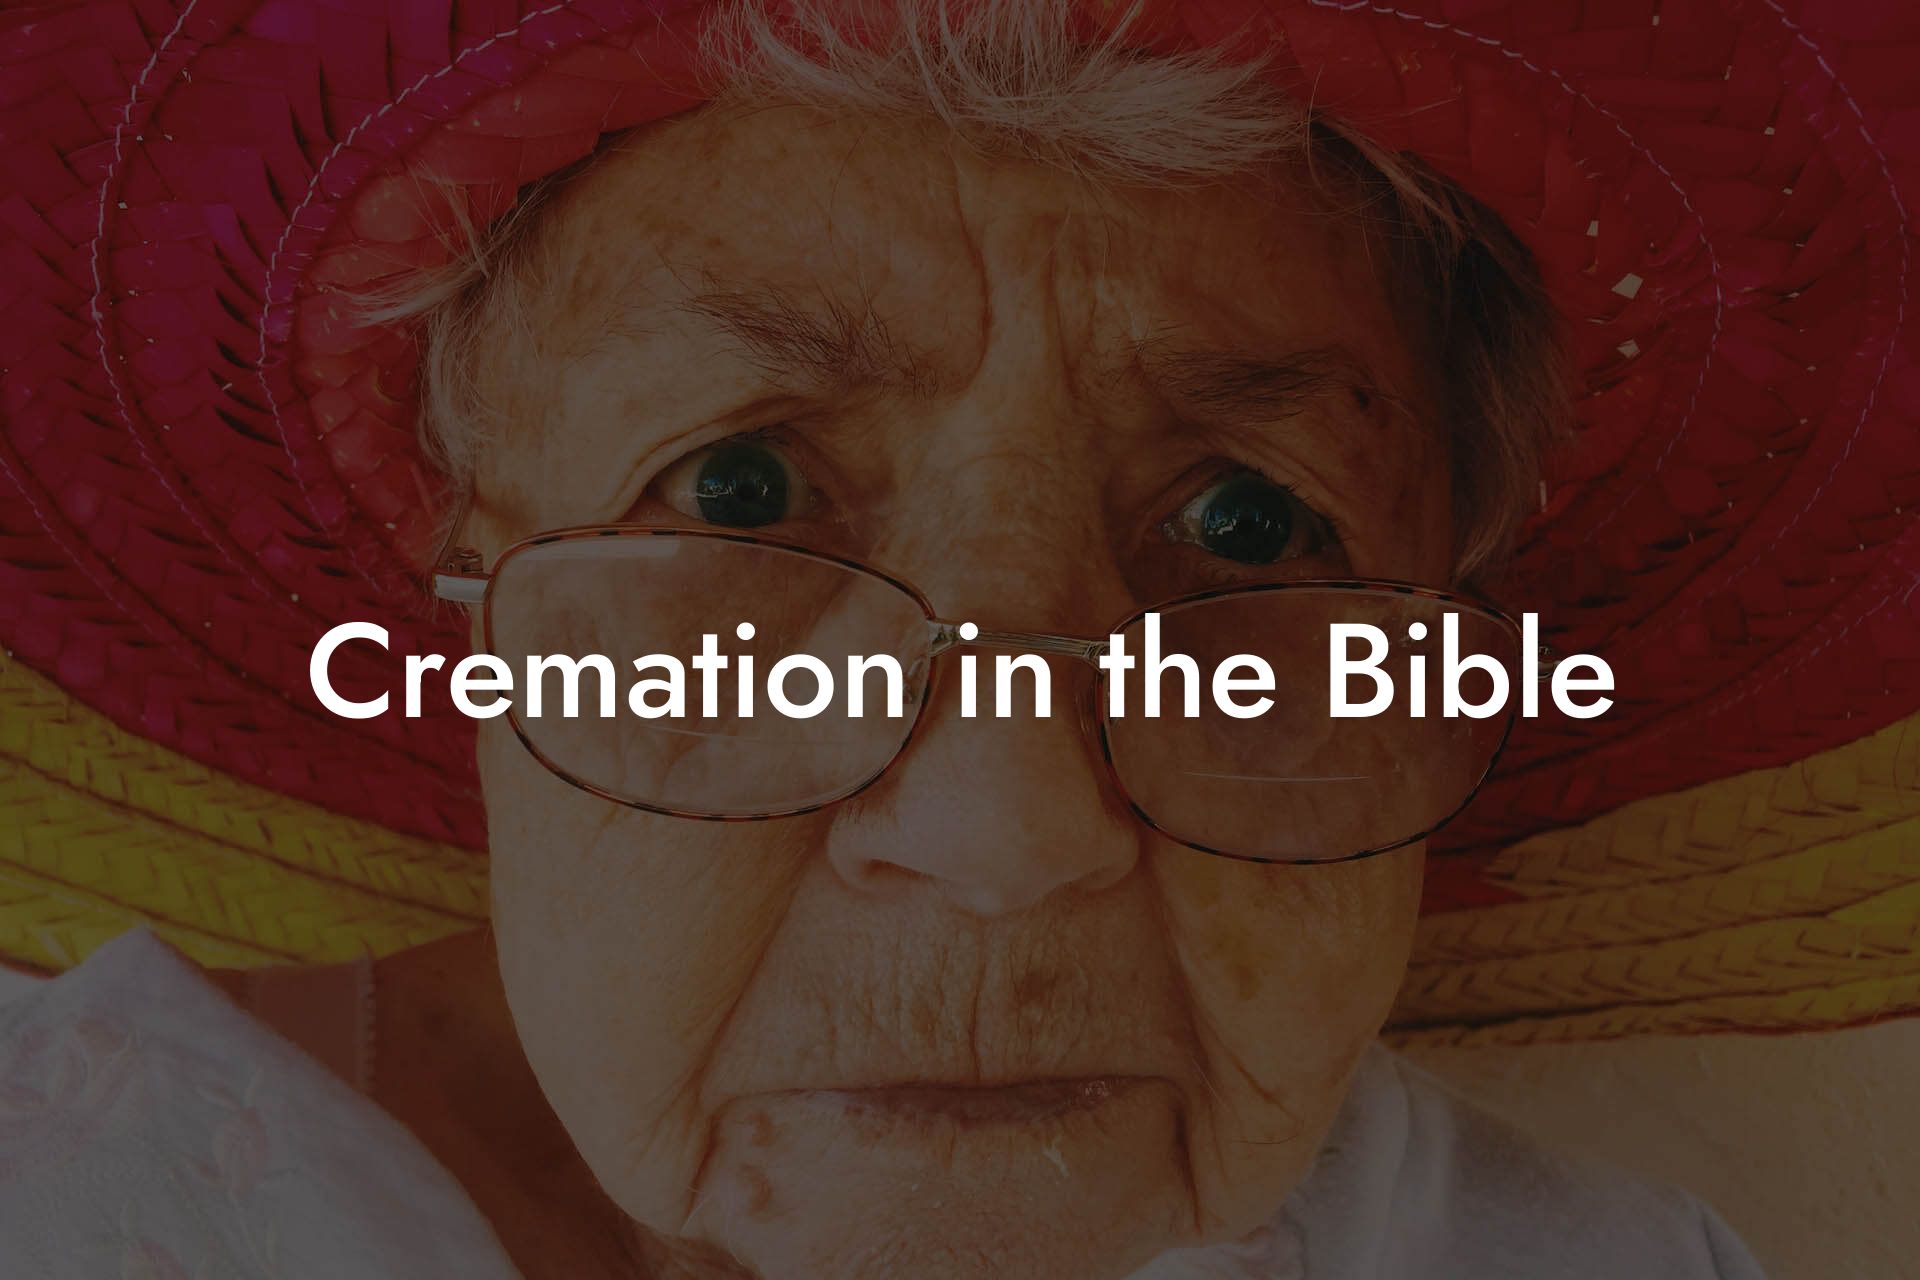 Cremation in the Bible